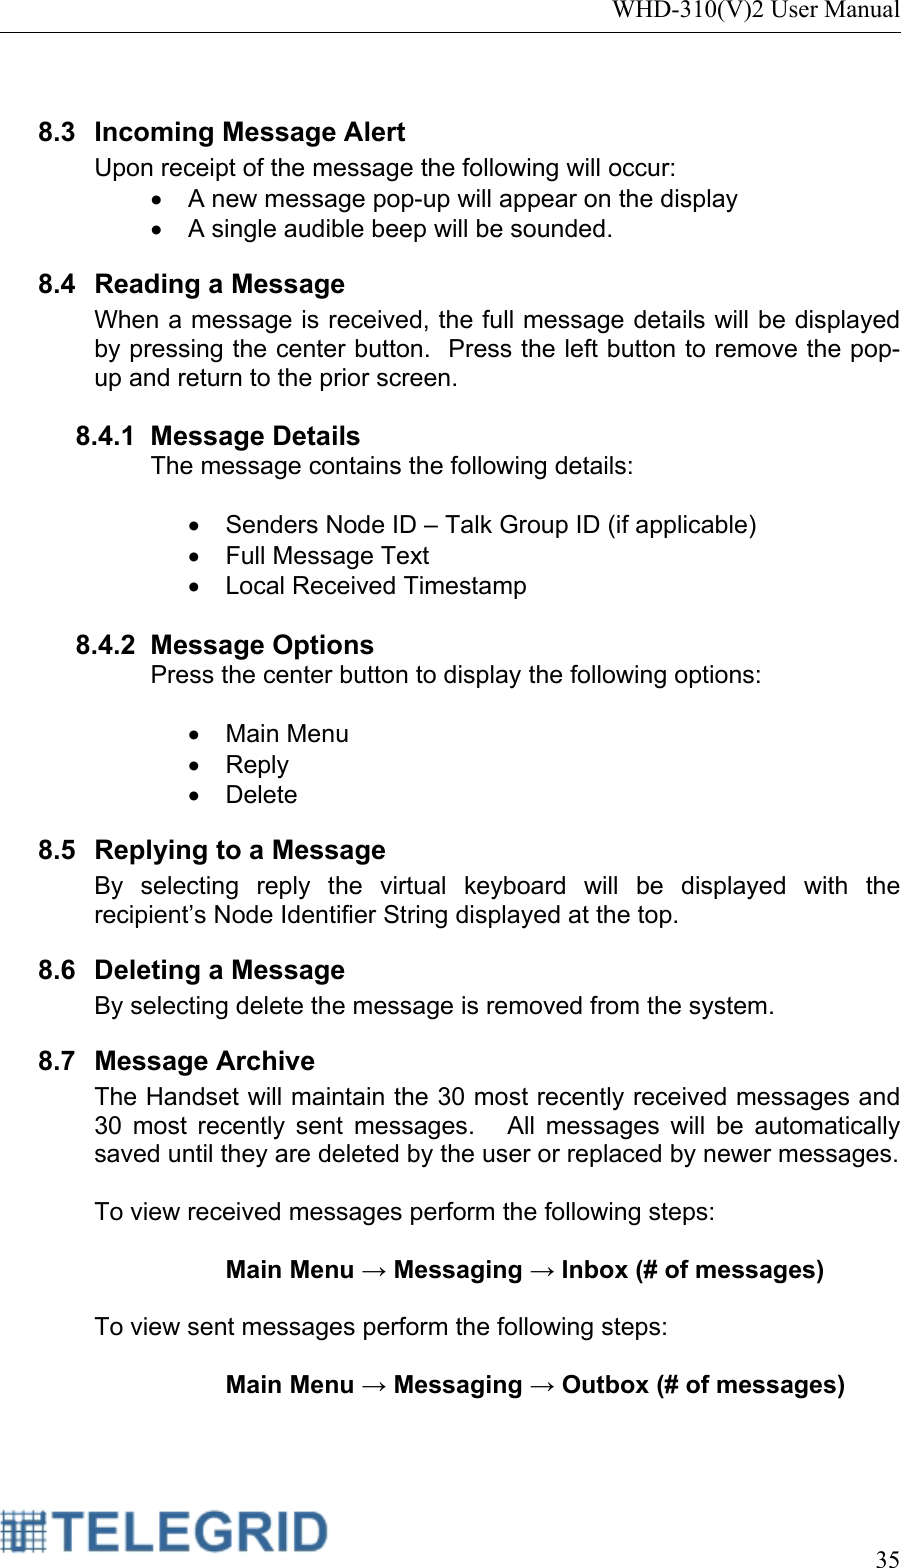 WHD-310(V)2 User Manual     35   8.3  Incoming Message Alert Upon receipt of the message the following will occur: •  A new message pop-up will appear on the display •  A single audible beep will be sounded. 8.4 Reading a Message When a message is received, the full message details will be displayed by pressing the center button.  Press the left button to remove the pop-up and return to the prior screen.  8.4.1 Message Details The message contains the following details:  •  Senders Node ID – Talk Group ID (if applicable) •  Full Message Text •  Local Received Timestamp   8.4.2 Message Options Press the center button to display the following options:  • Main Menu • Reply • Delete 8.5  Replying to a Message By selecting reply the virtual keyboard will be displayed with the recipient’s Node Identifier String displayed at the top. 8.6 Deleting a Message By selecting delete the message is removed from the system. 8.7 Message Archive The Handset will maintain the 30 most recently received messages and 30 most recently sent messages.   All messages will be automatically saved until they are deleted by the user or replaced by newer messages.  To view received messages perform the following steps:   Main Menu → Messaging → Inbox (# of messages)  To view sent messages perform the following steps:   Main Menu → Messaging → Outbox (# of messages)  